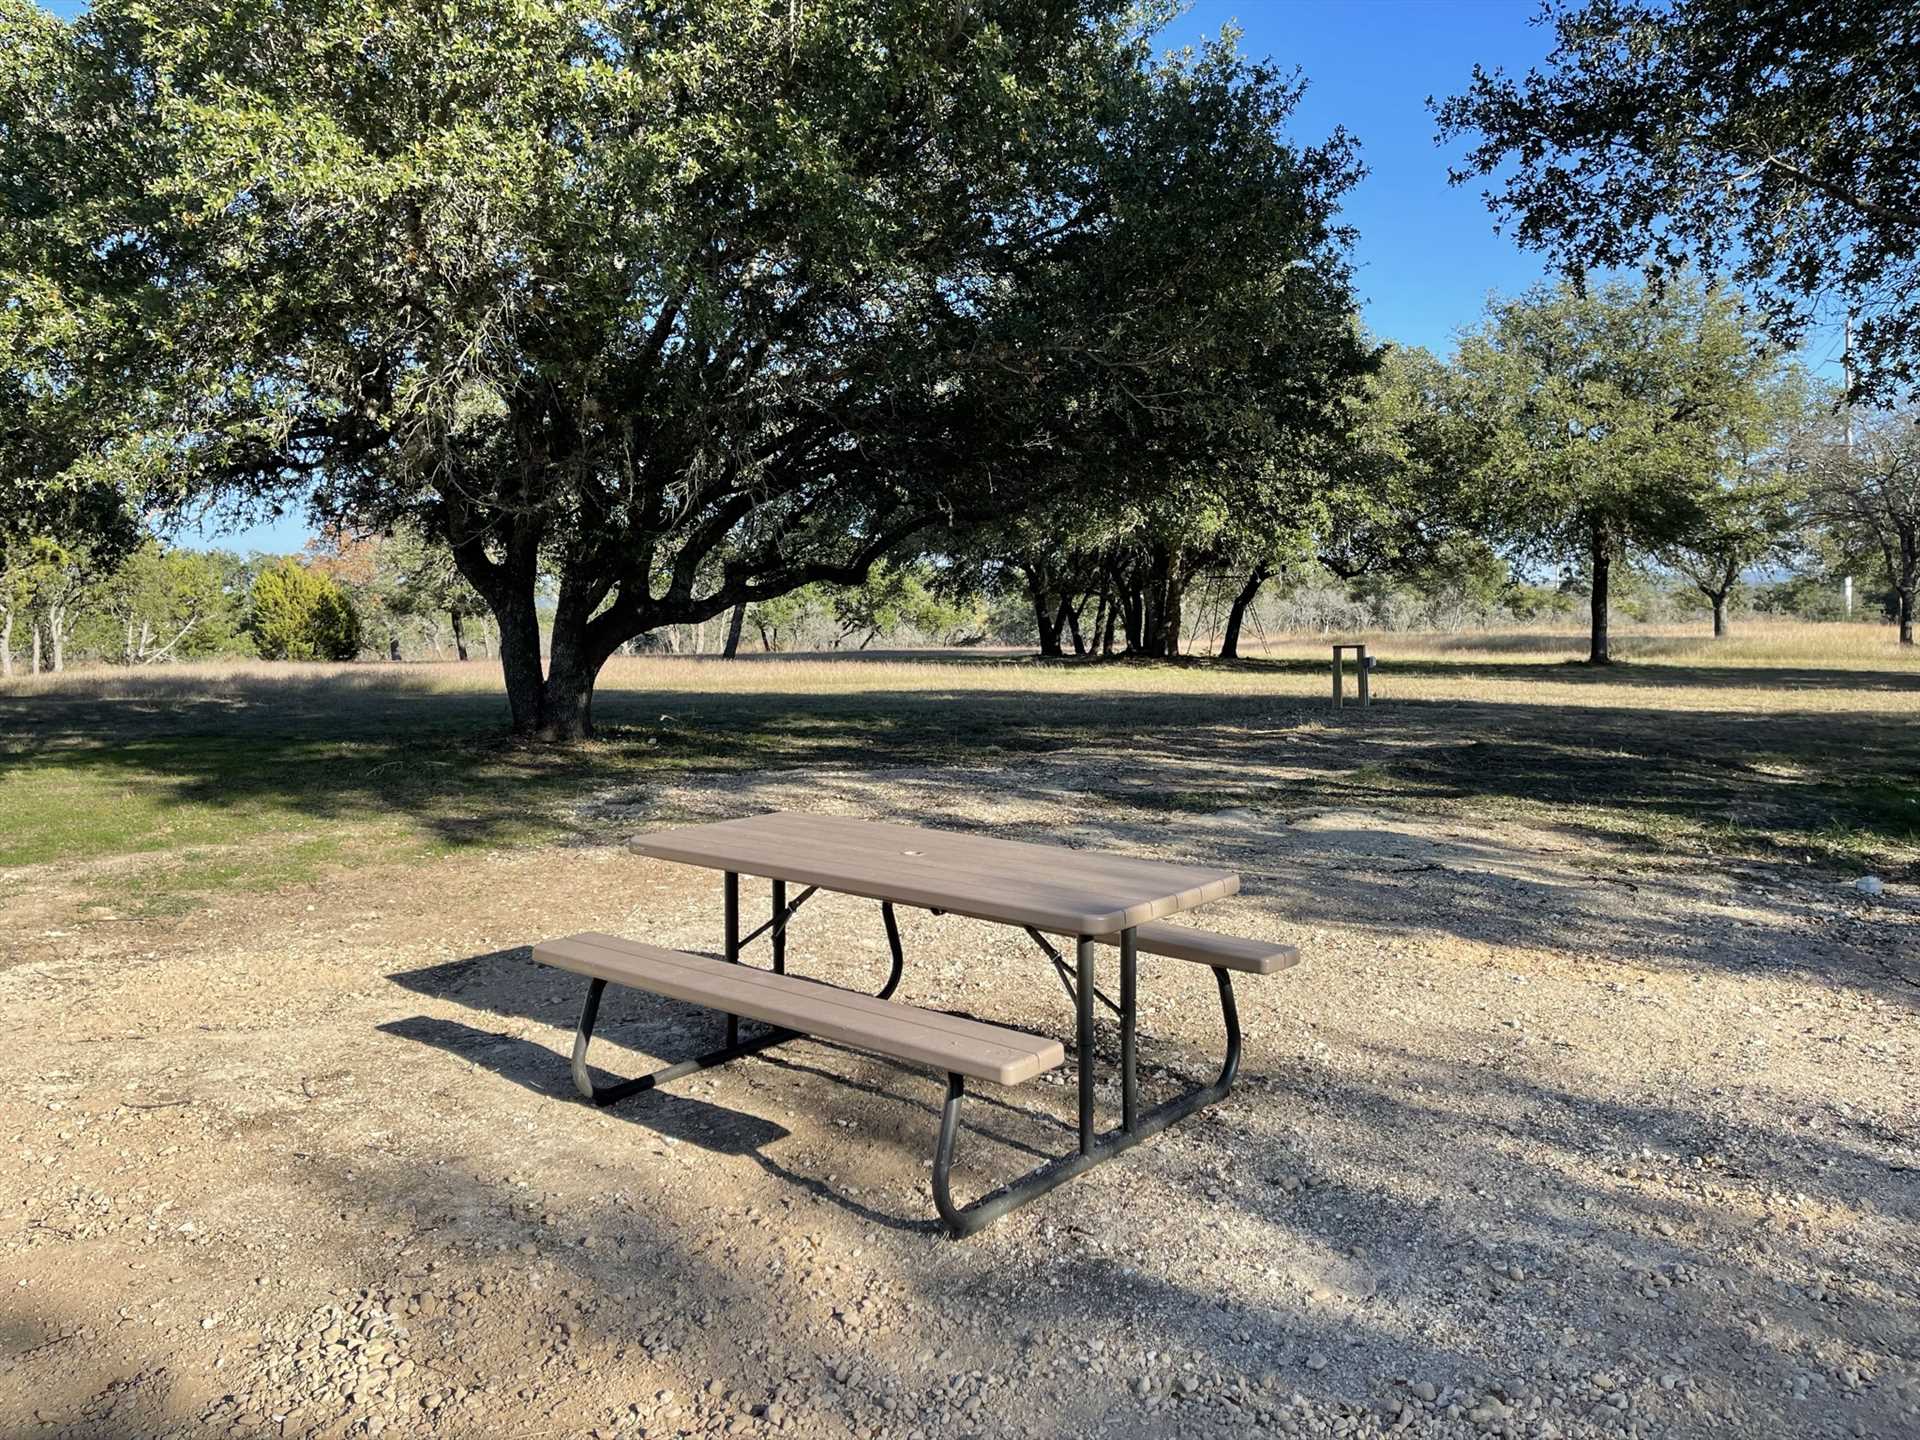                                                 Test your aim at the horseshoe pit! Also, the ranch is known for the deer that love to explore the area.